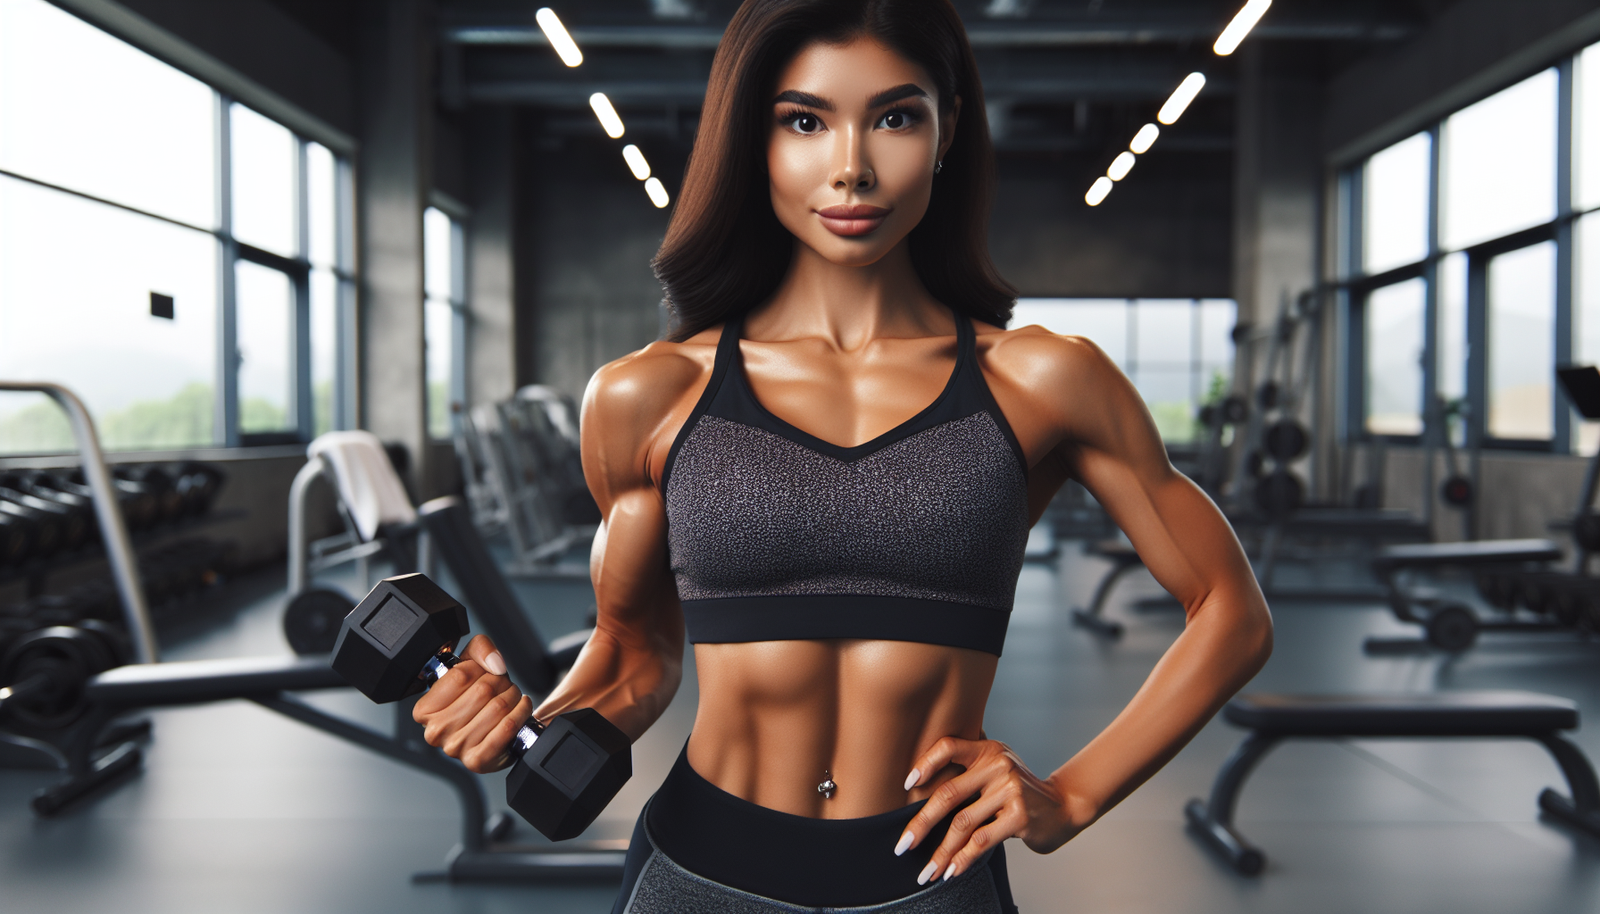 Essential Guide on How to Build Muscle Mass for Women